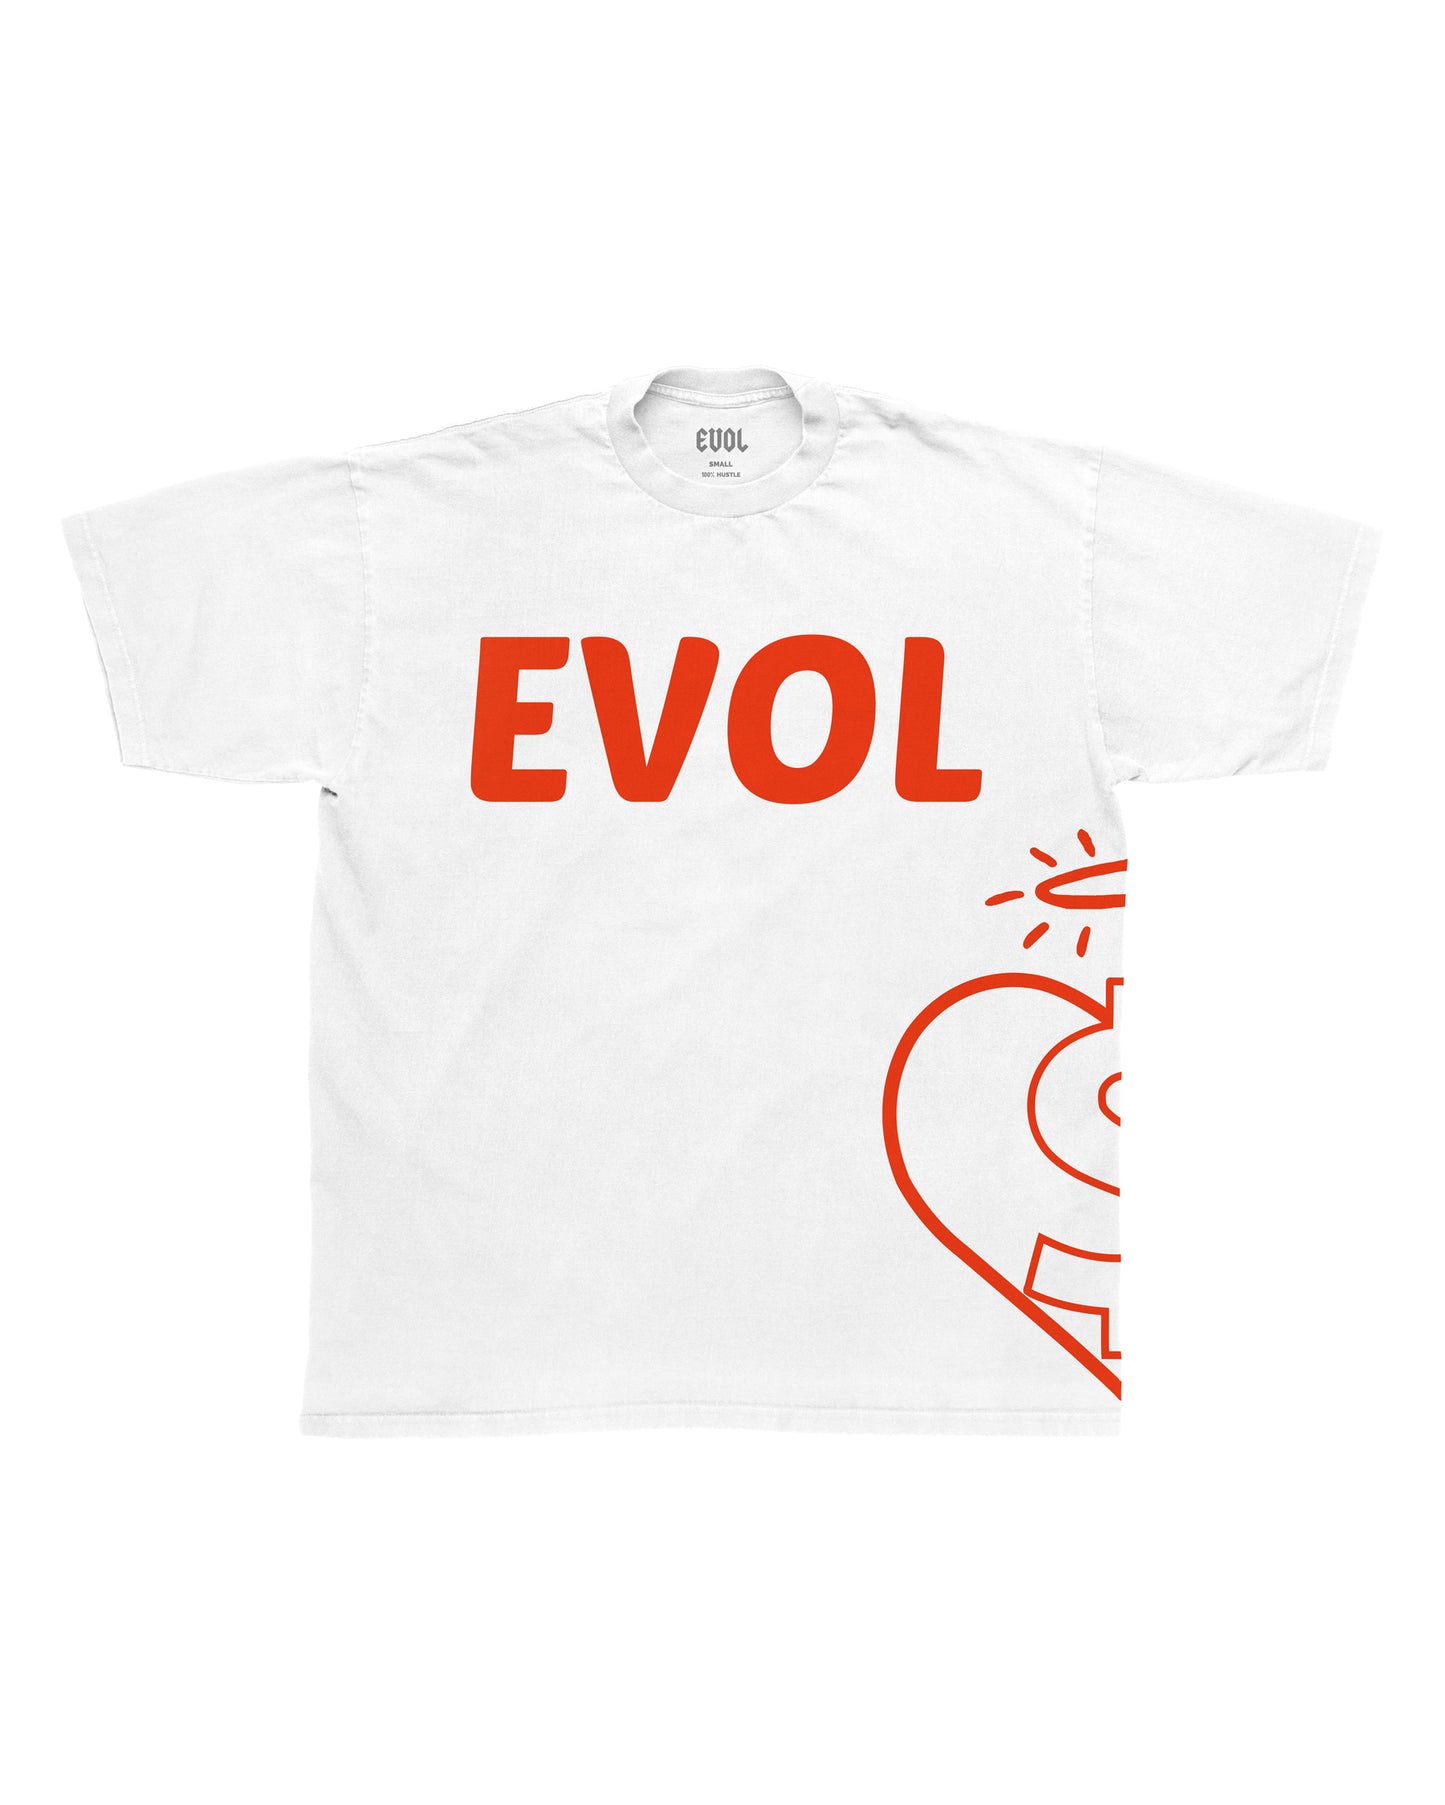 EVOL Side Logo Shirt White And Red